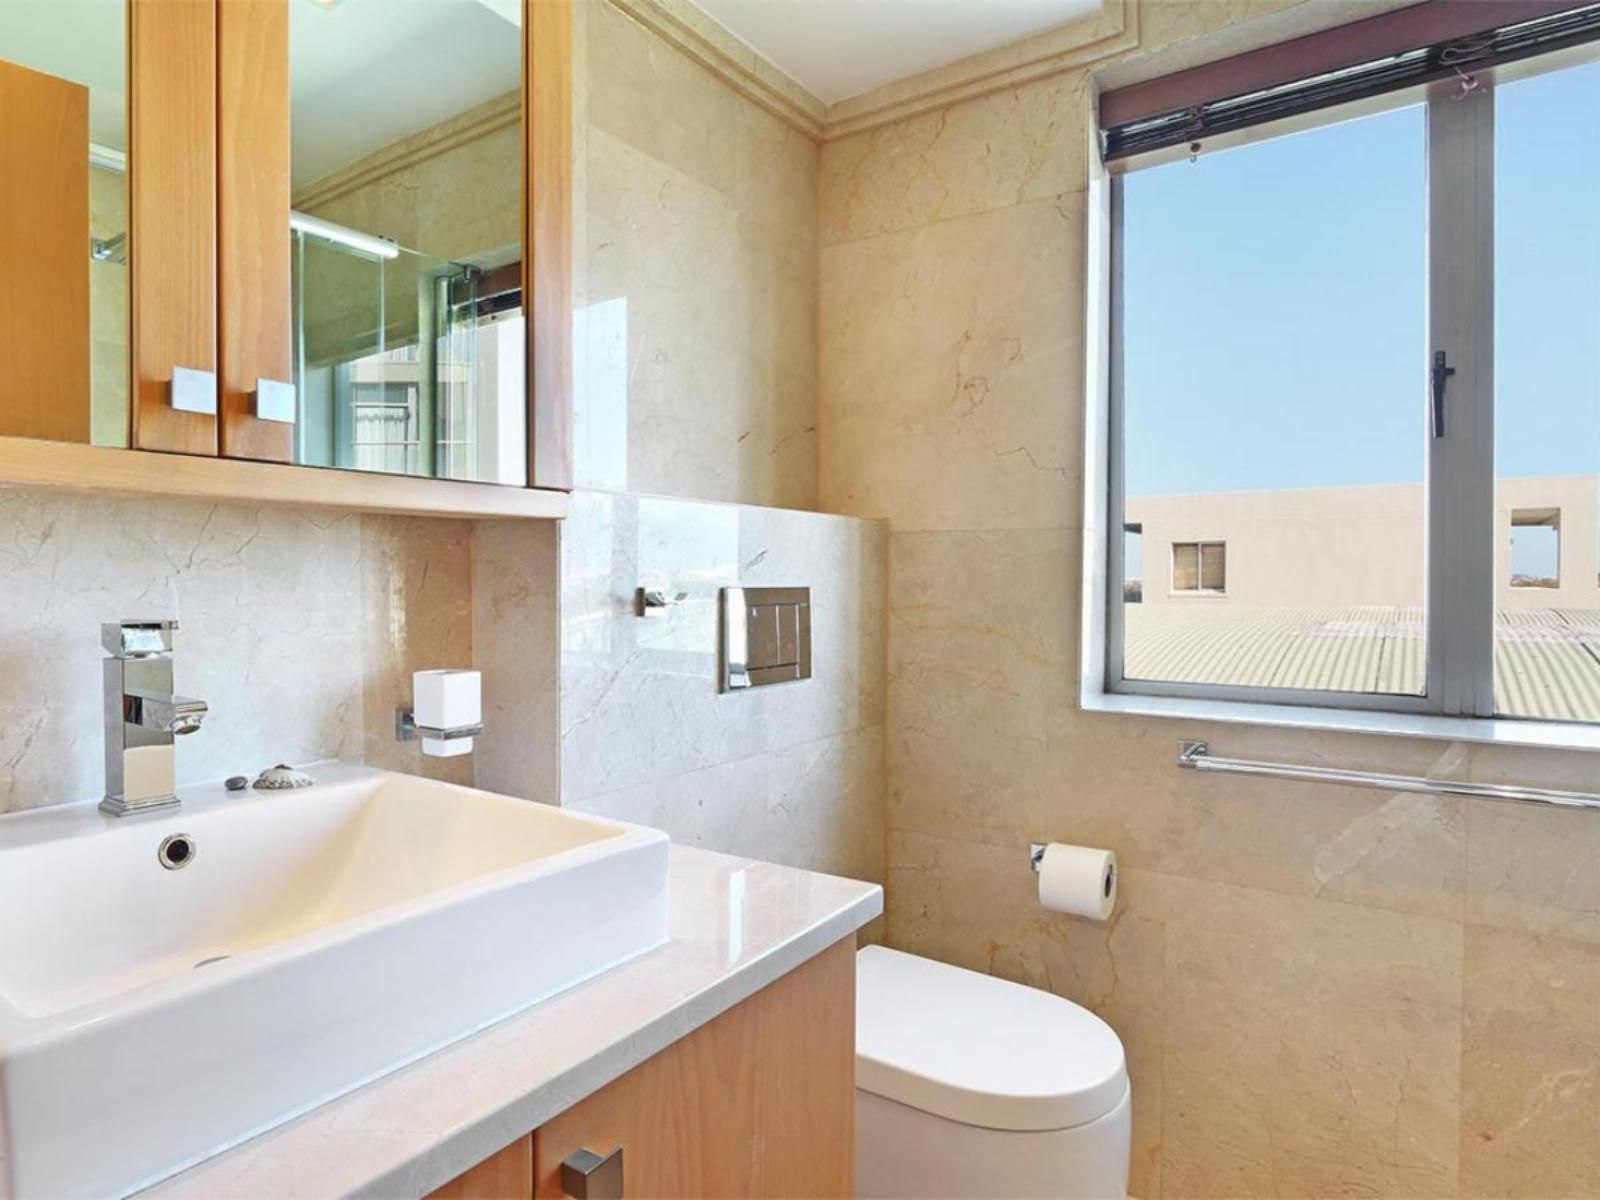 Dolphin Beach E5 By Hostagents Blouberg Cape Town Western Cape South Africa Bathroom